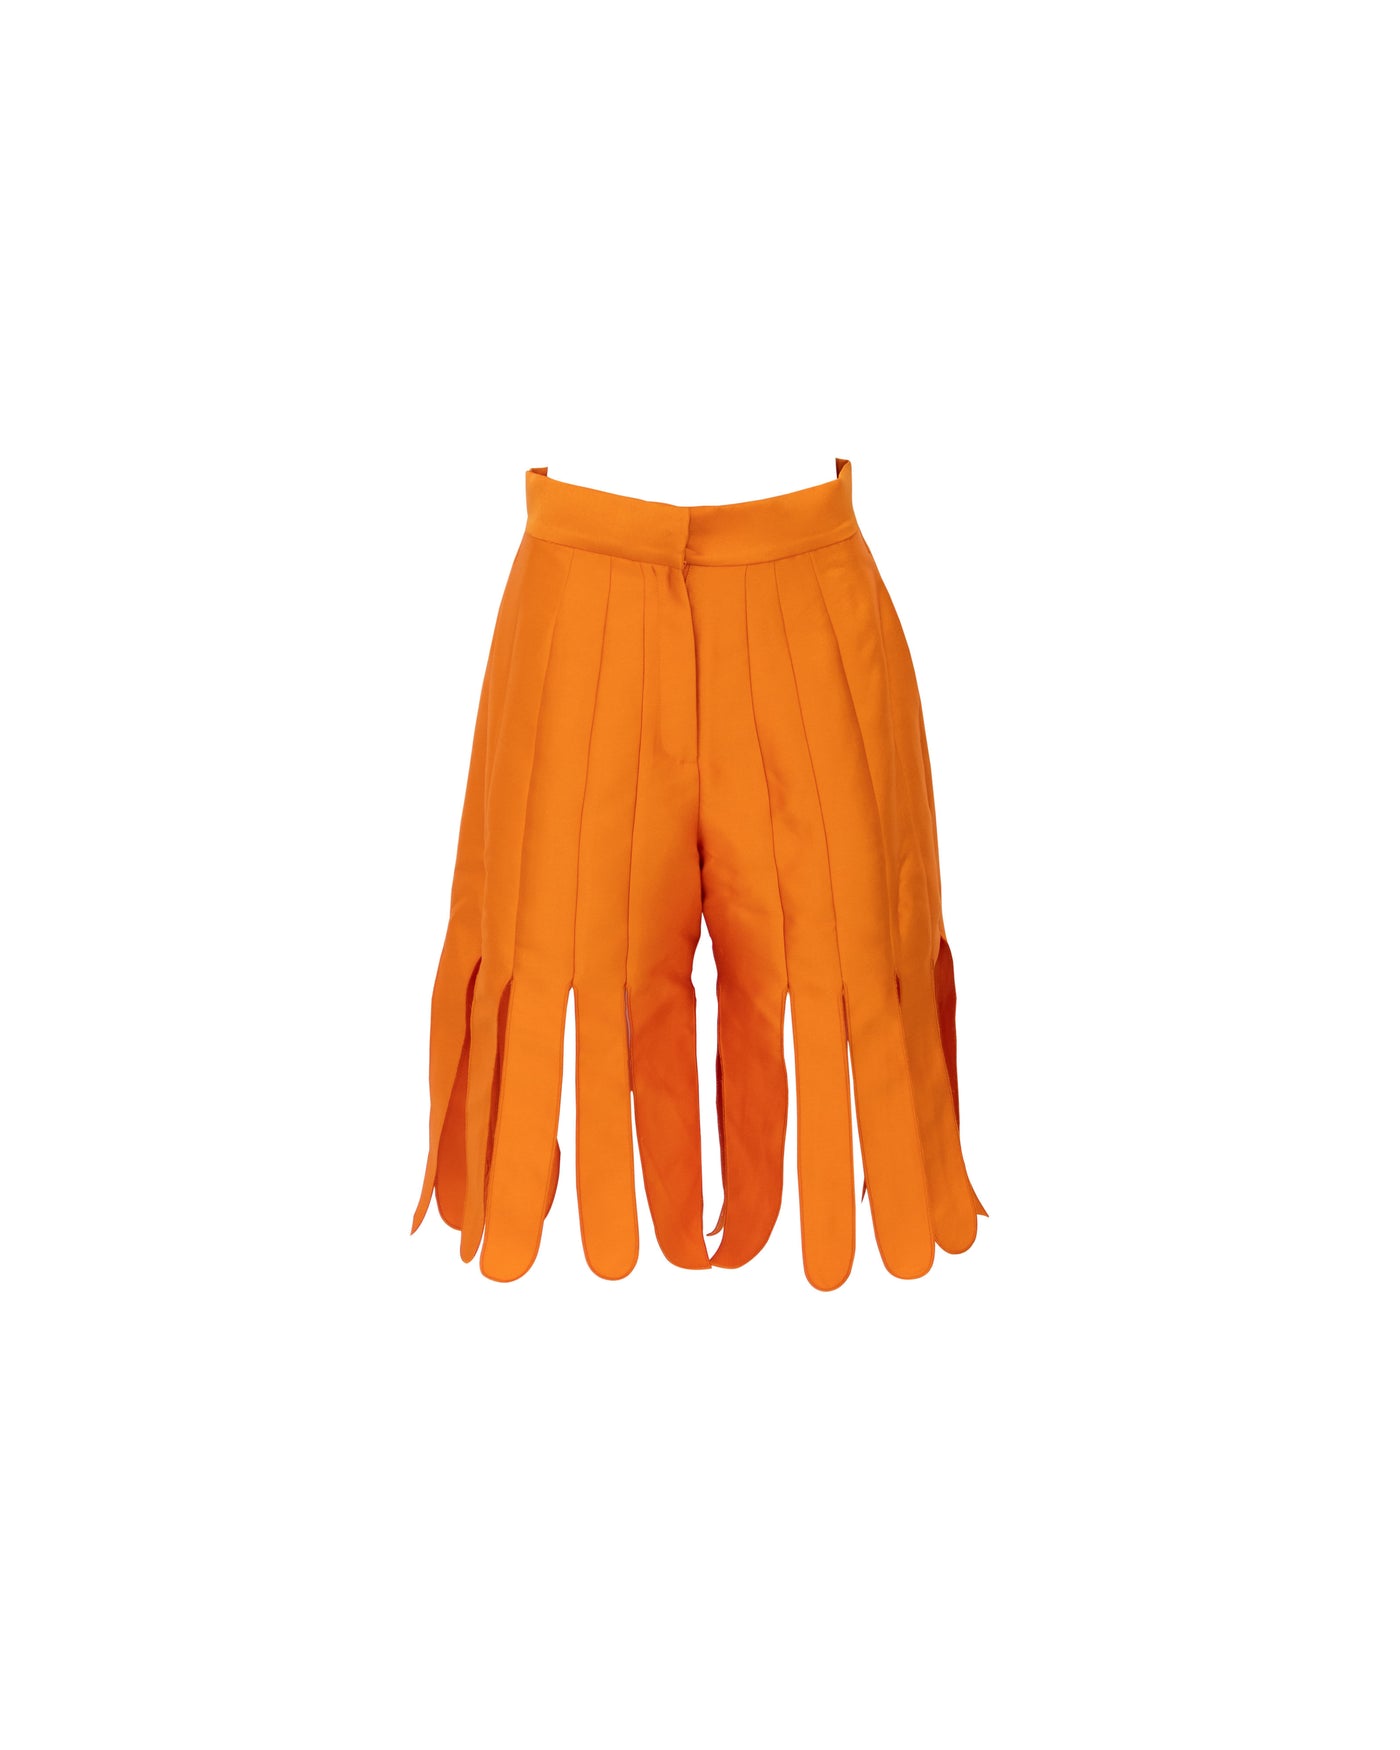 Spread Your Wings  - Shorts  (Orange)